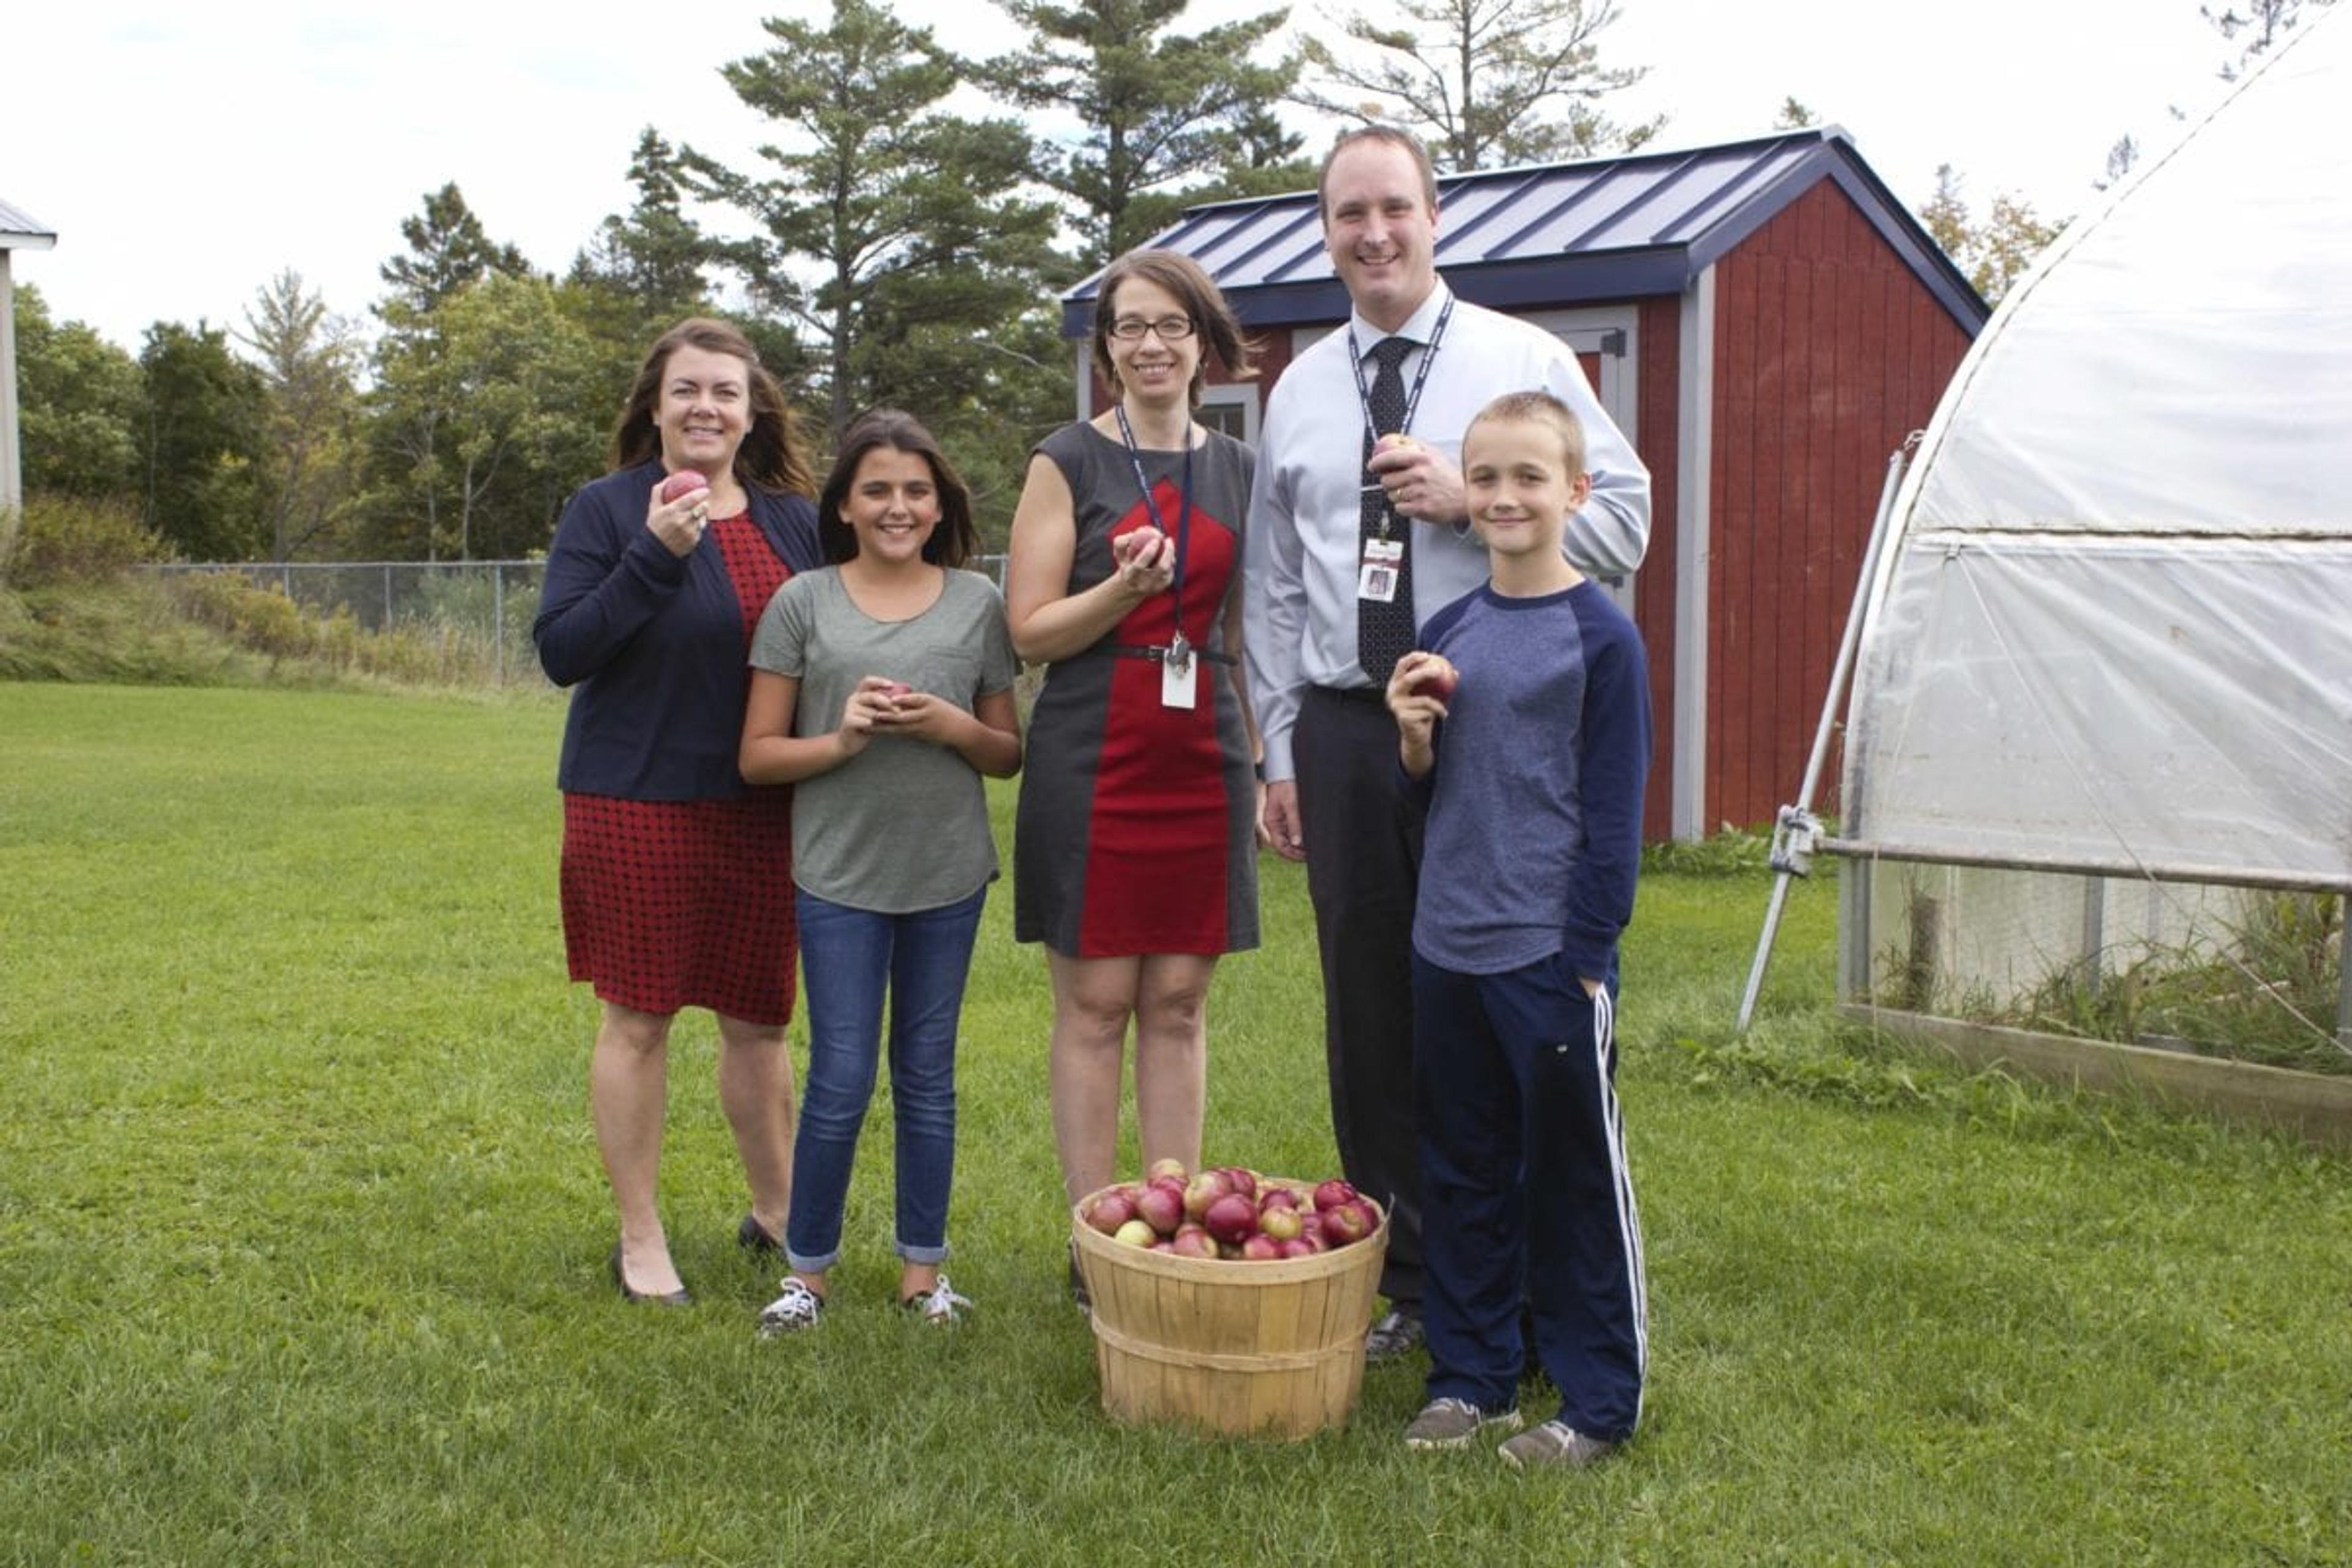 Students and staff from Aspen Ridge Elementary in Marquette will participate Apple Crunch Day Oct. 13. Pictured (left to right): Pam Roose, R.D., Blue Cross Blue Shield of Michigan; Morgan Nelson, Aspen Ridge student; Ms. Young, 5th Grade Teacher; Principal Chris Marana, Mason Kietikko.